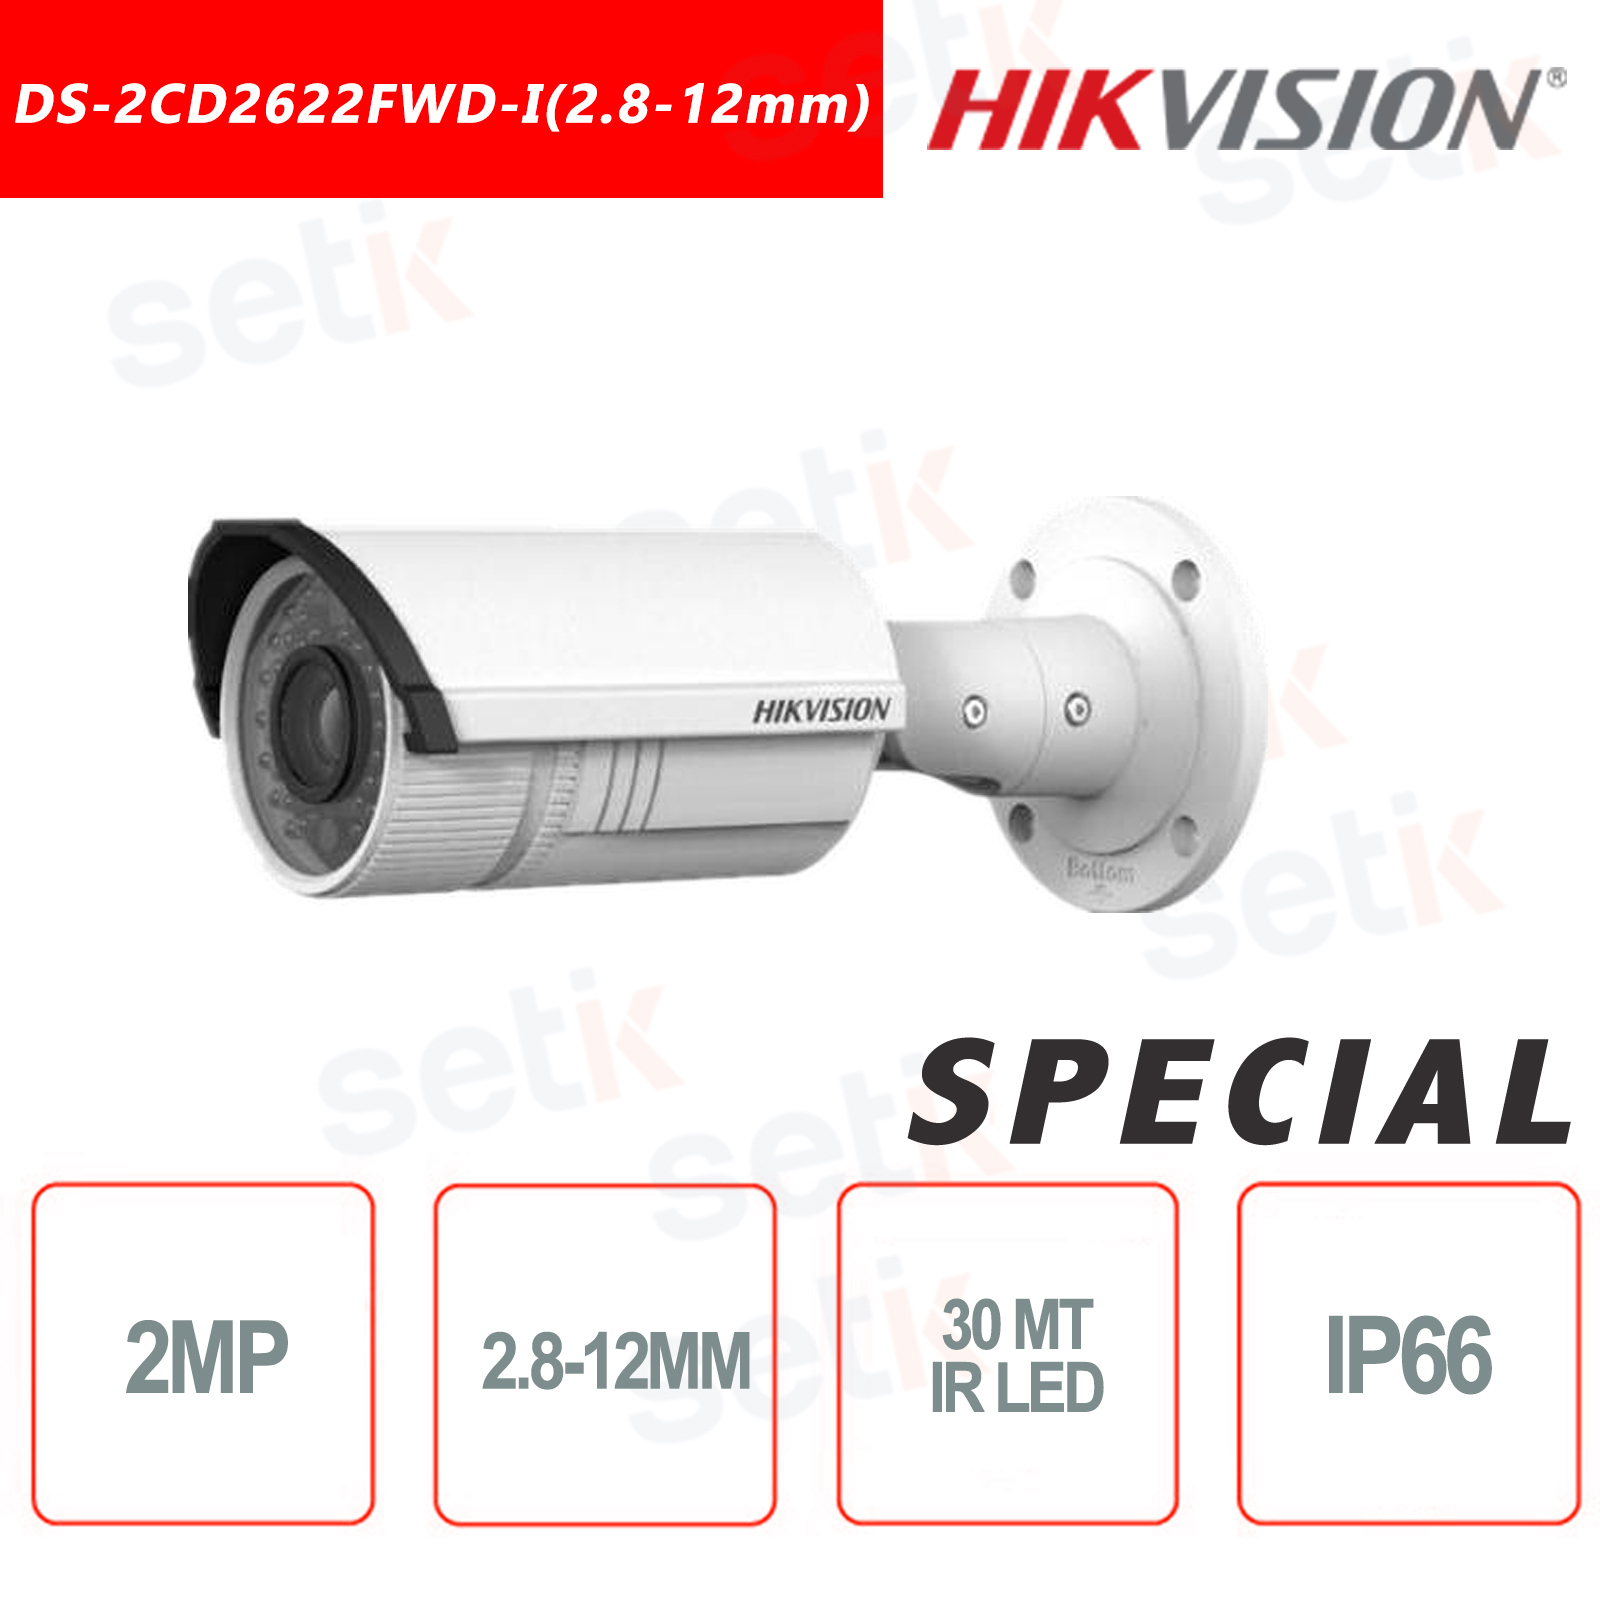 telecamera-ip-dome-wifi-2mp-starlight-4mm-cablefree-ivs-wdr-tiandy.jpg